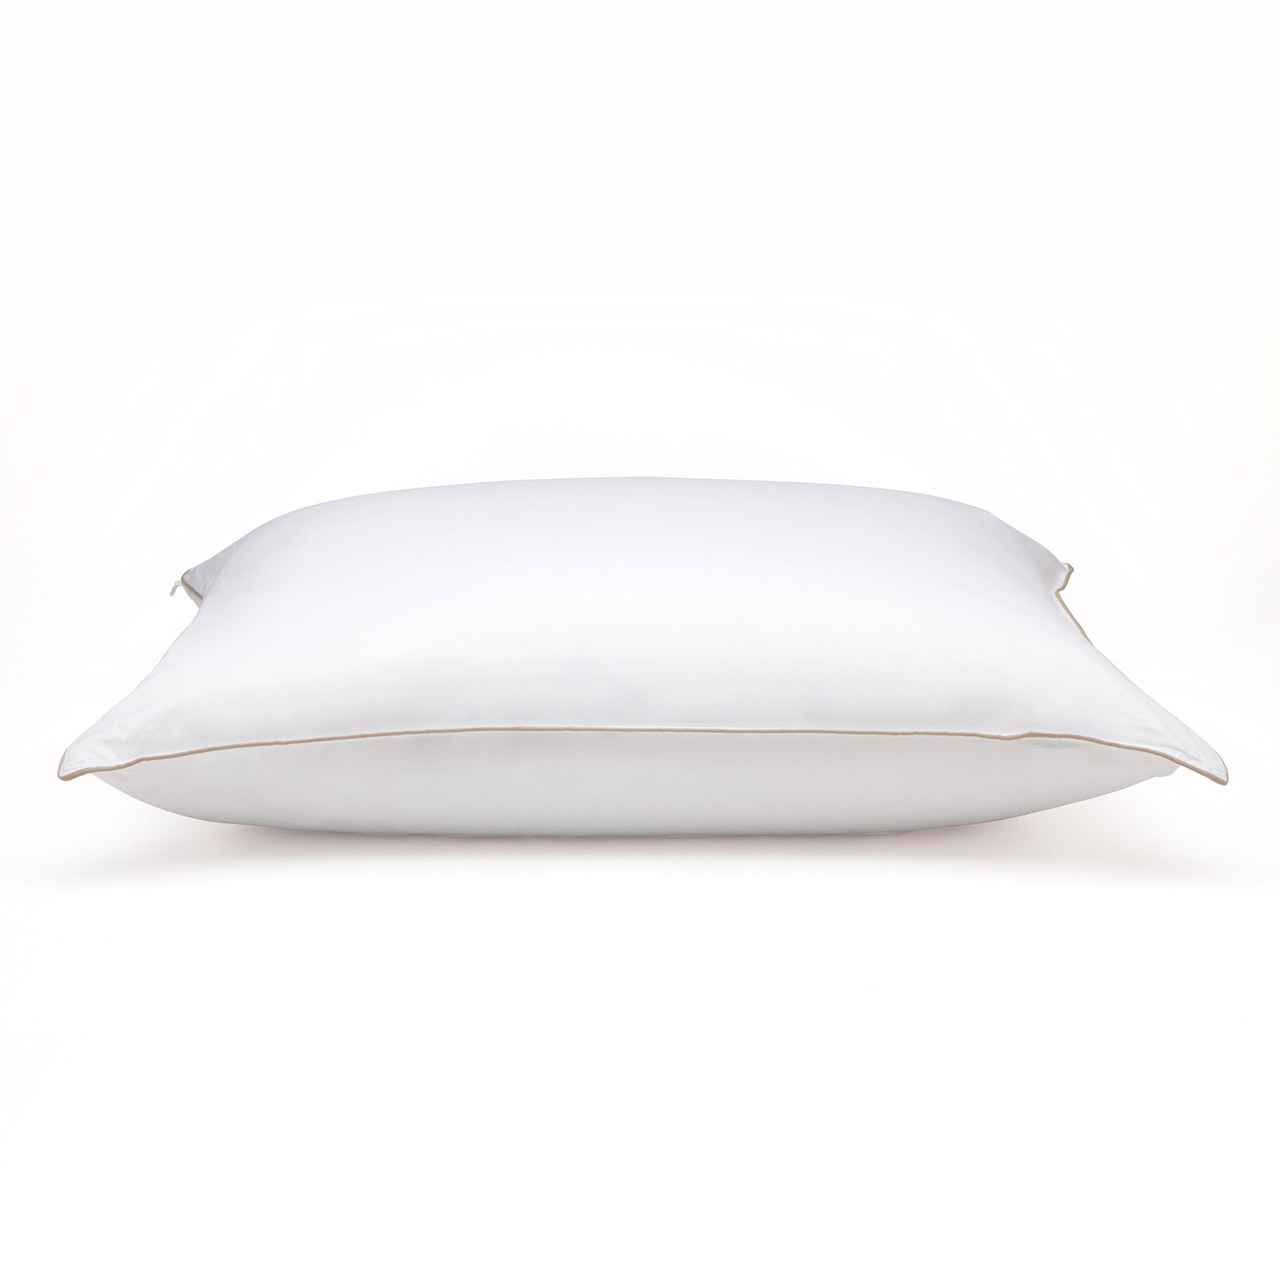 Soft Plush Pillow for Stomach Sleepers